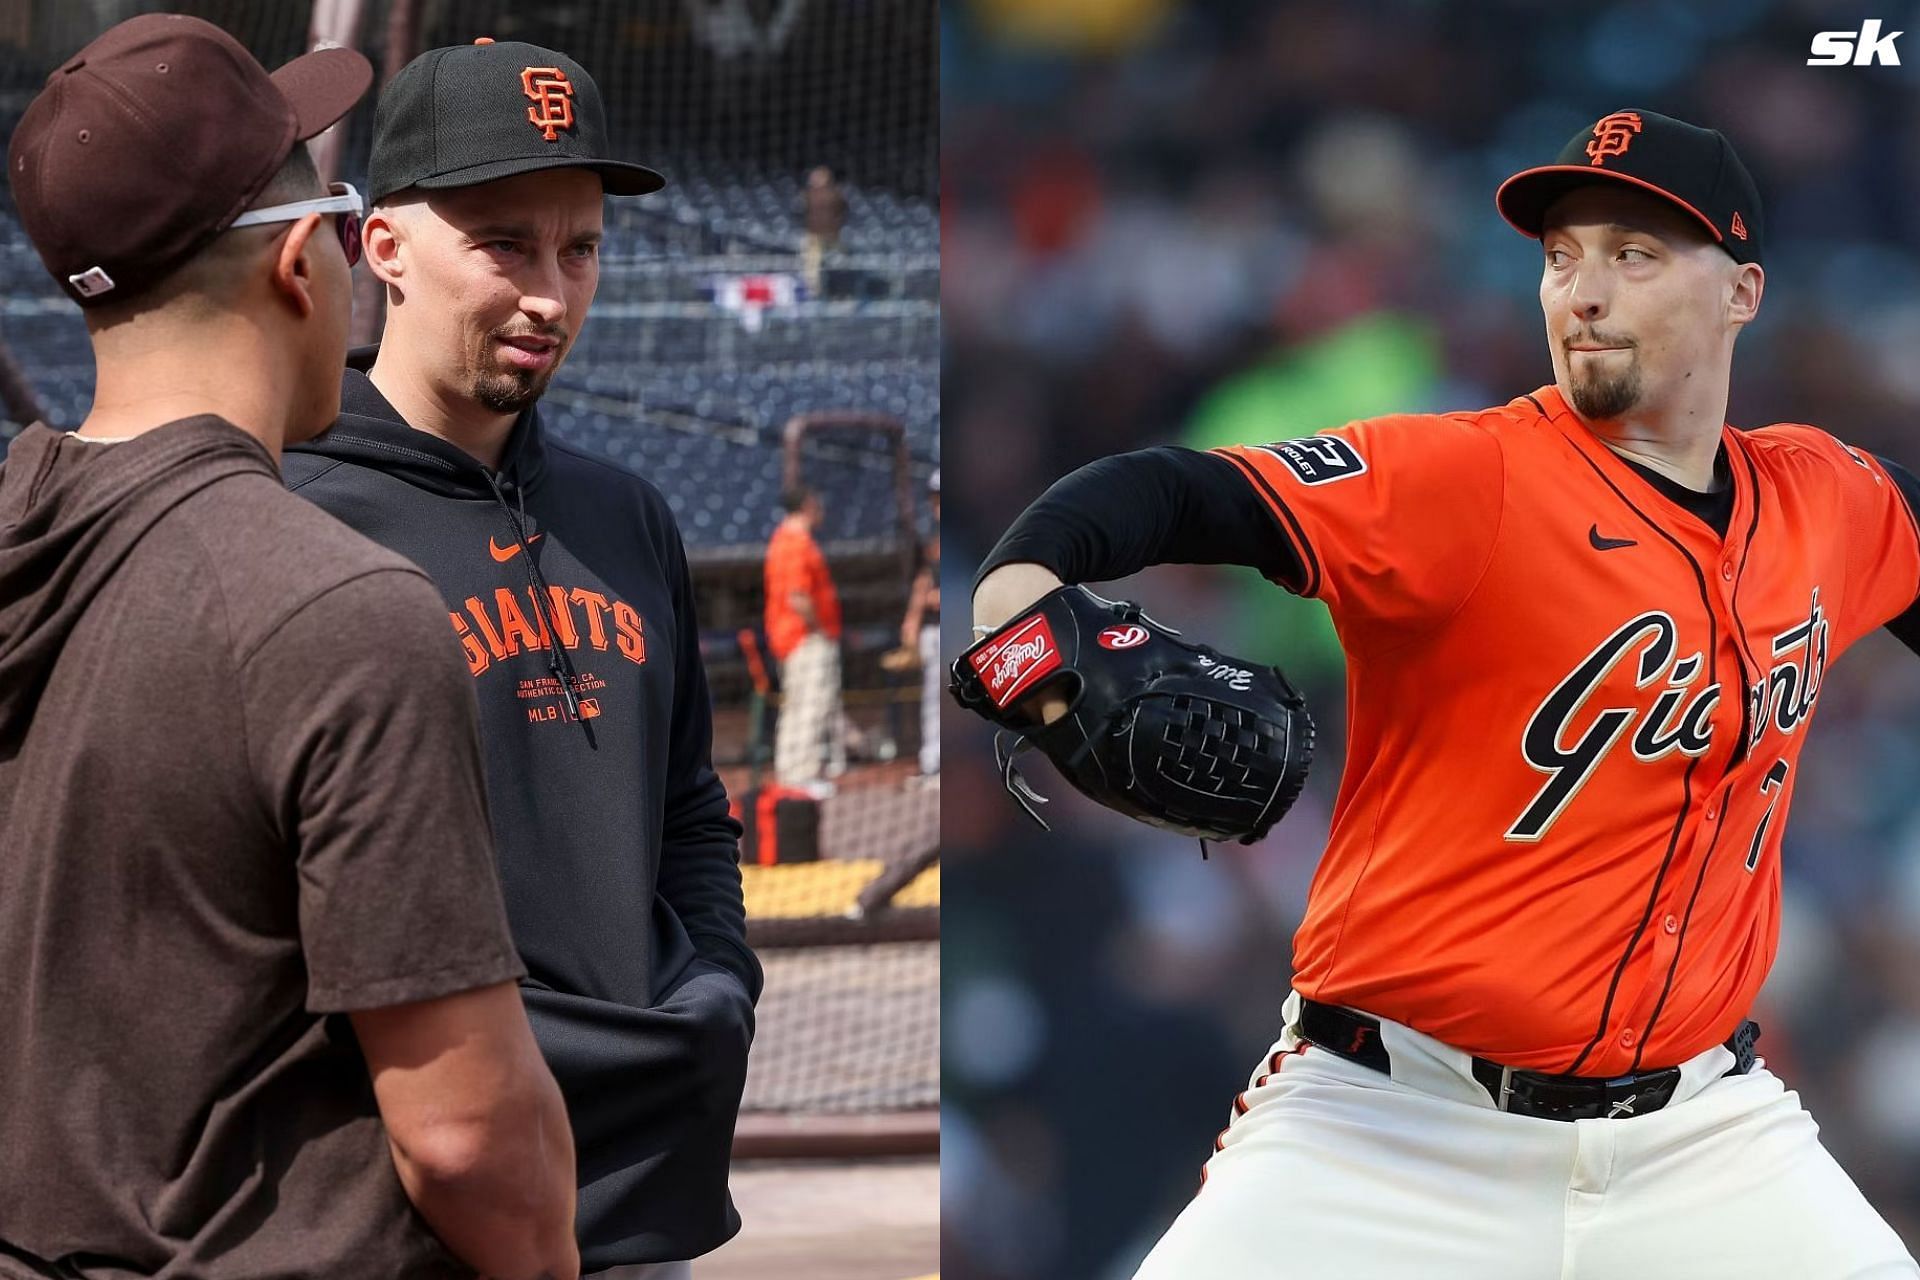 Fans troll Blake Snell as he struggles to find footing with the Giants 